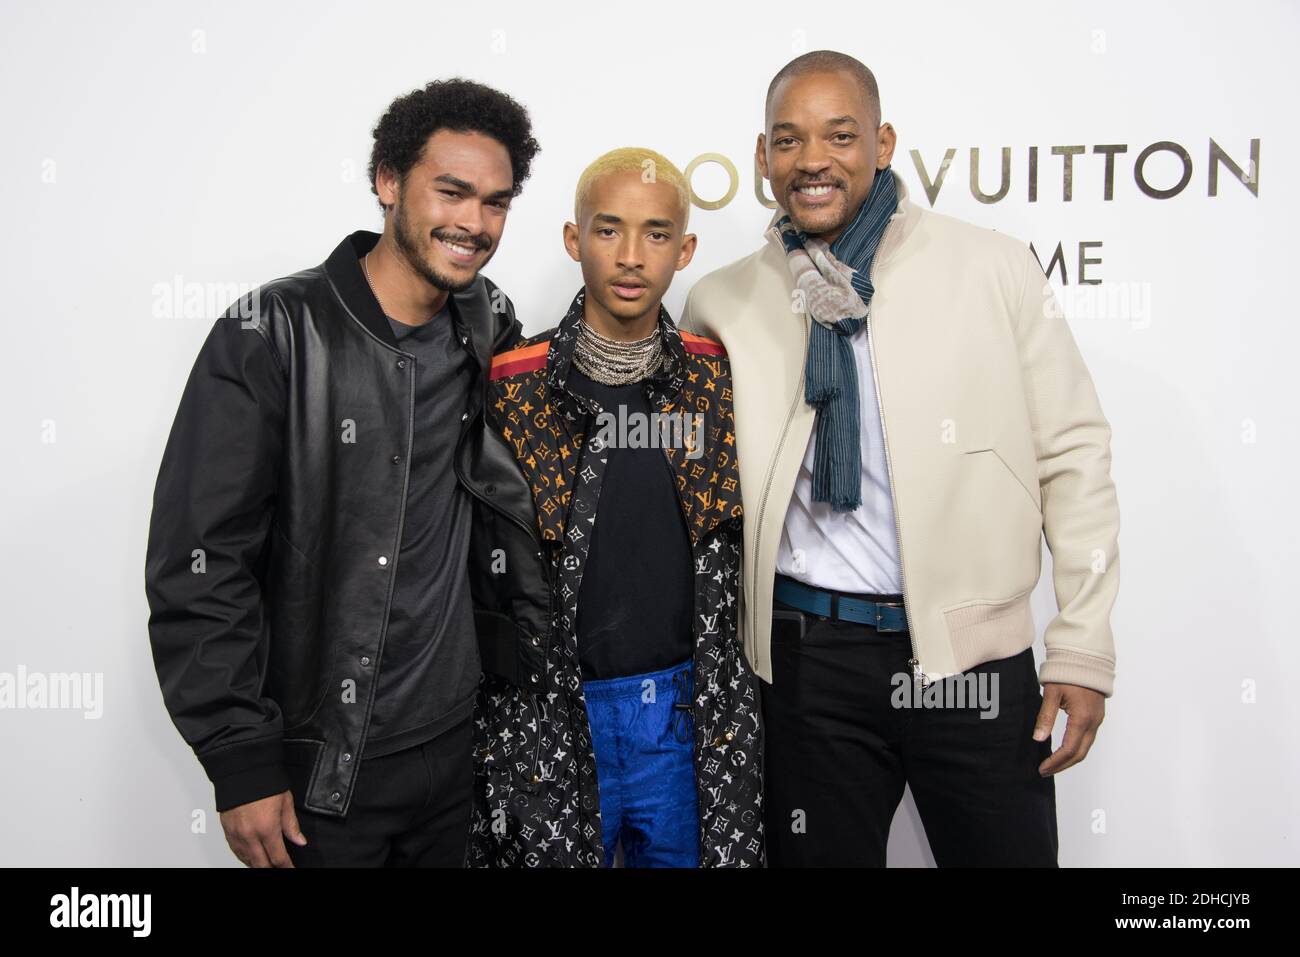 Jaden Smith Was the Ultimate Shapeshifter at Paris Fashion Week